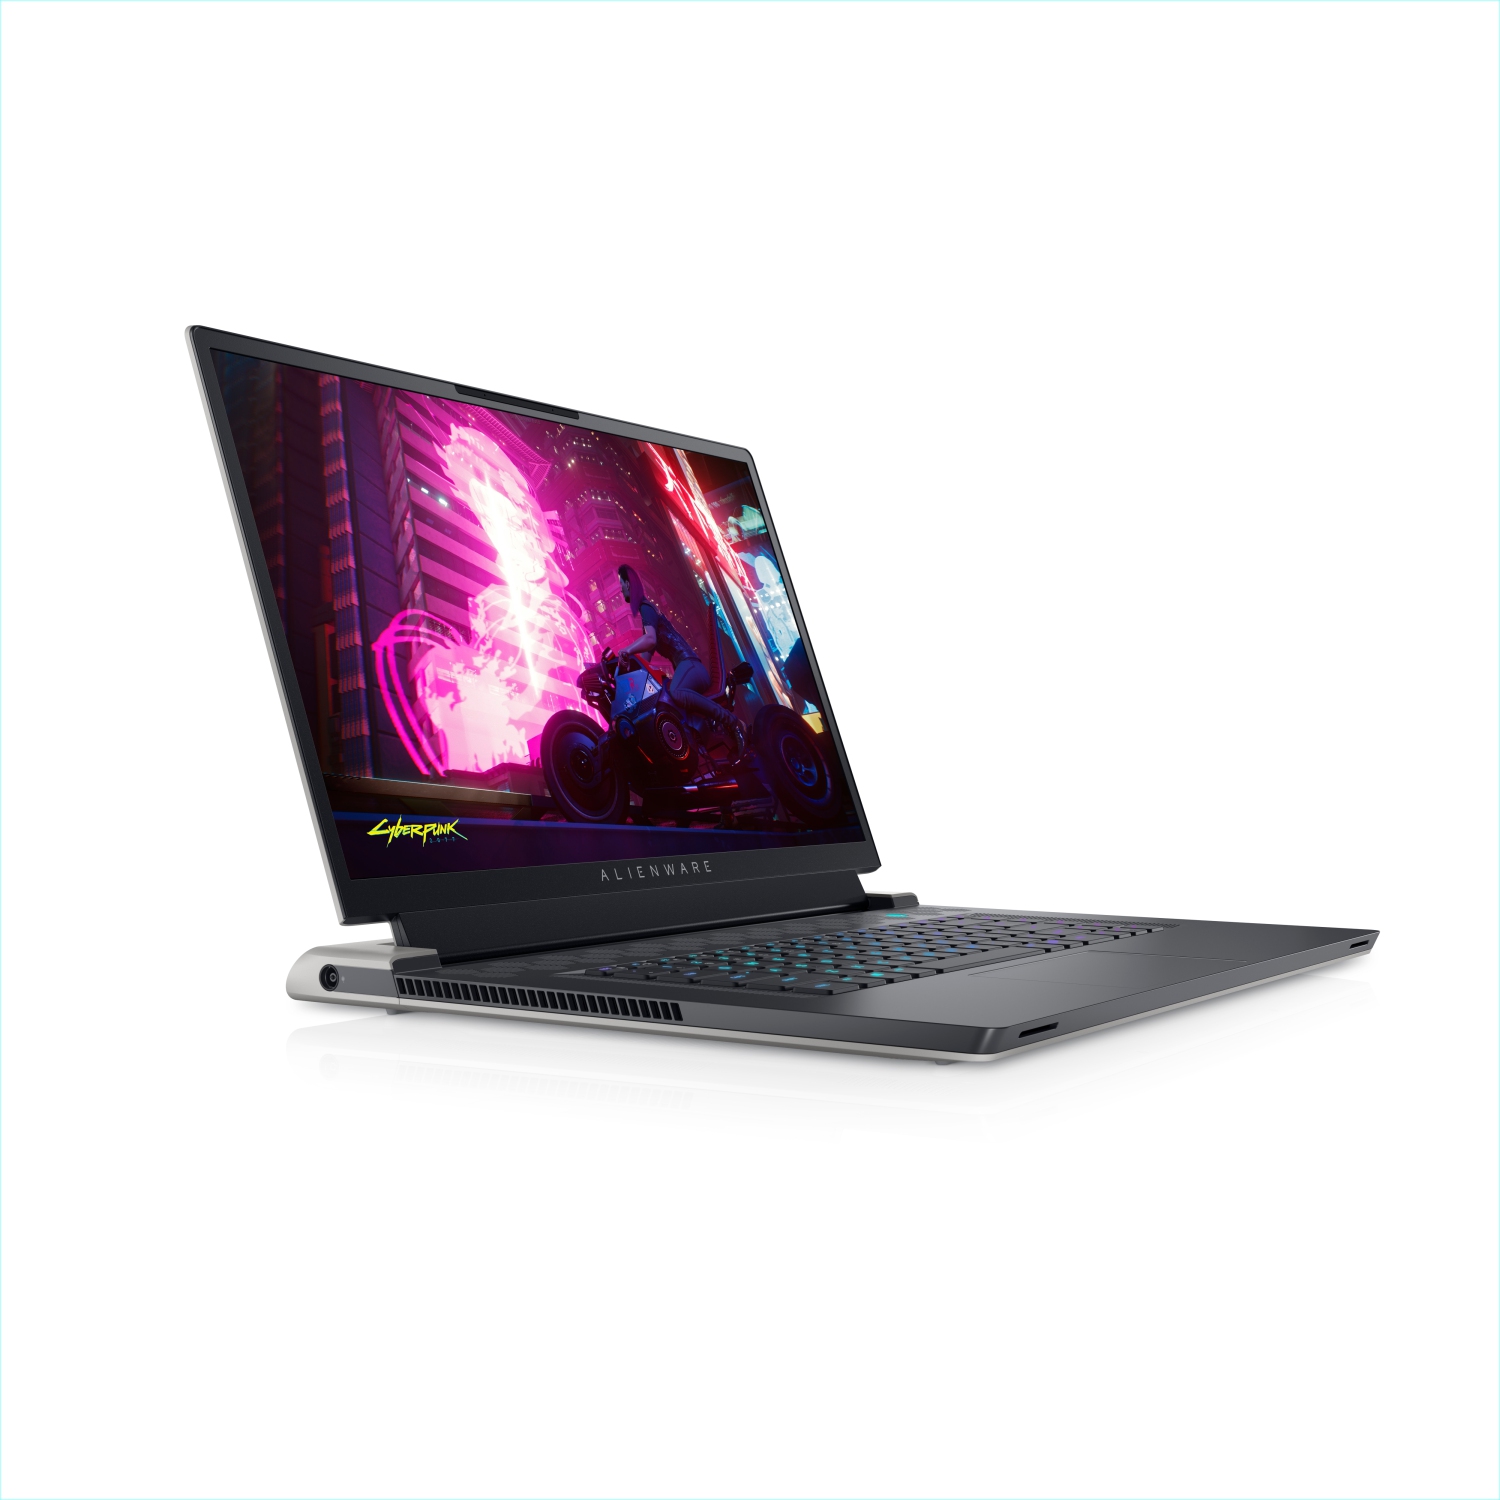 Refurbished (Excellent) - Dell Alienware X17 R1 Gaming Laptop (2021), 17.3" 4K, Core i7, 2TB SSD + 2TB SSD, 64GB RAM, RTX 3080, 4.6 GHz, 11th Gen CPU Certified